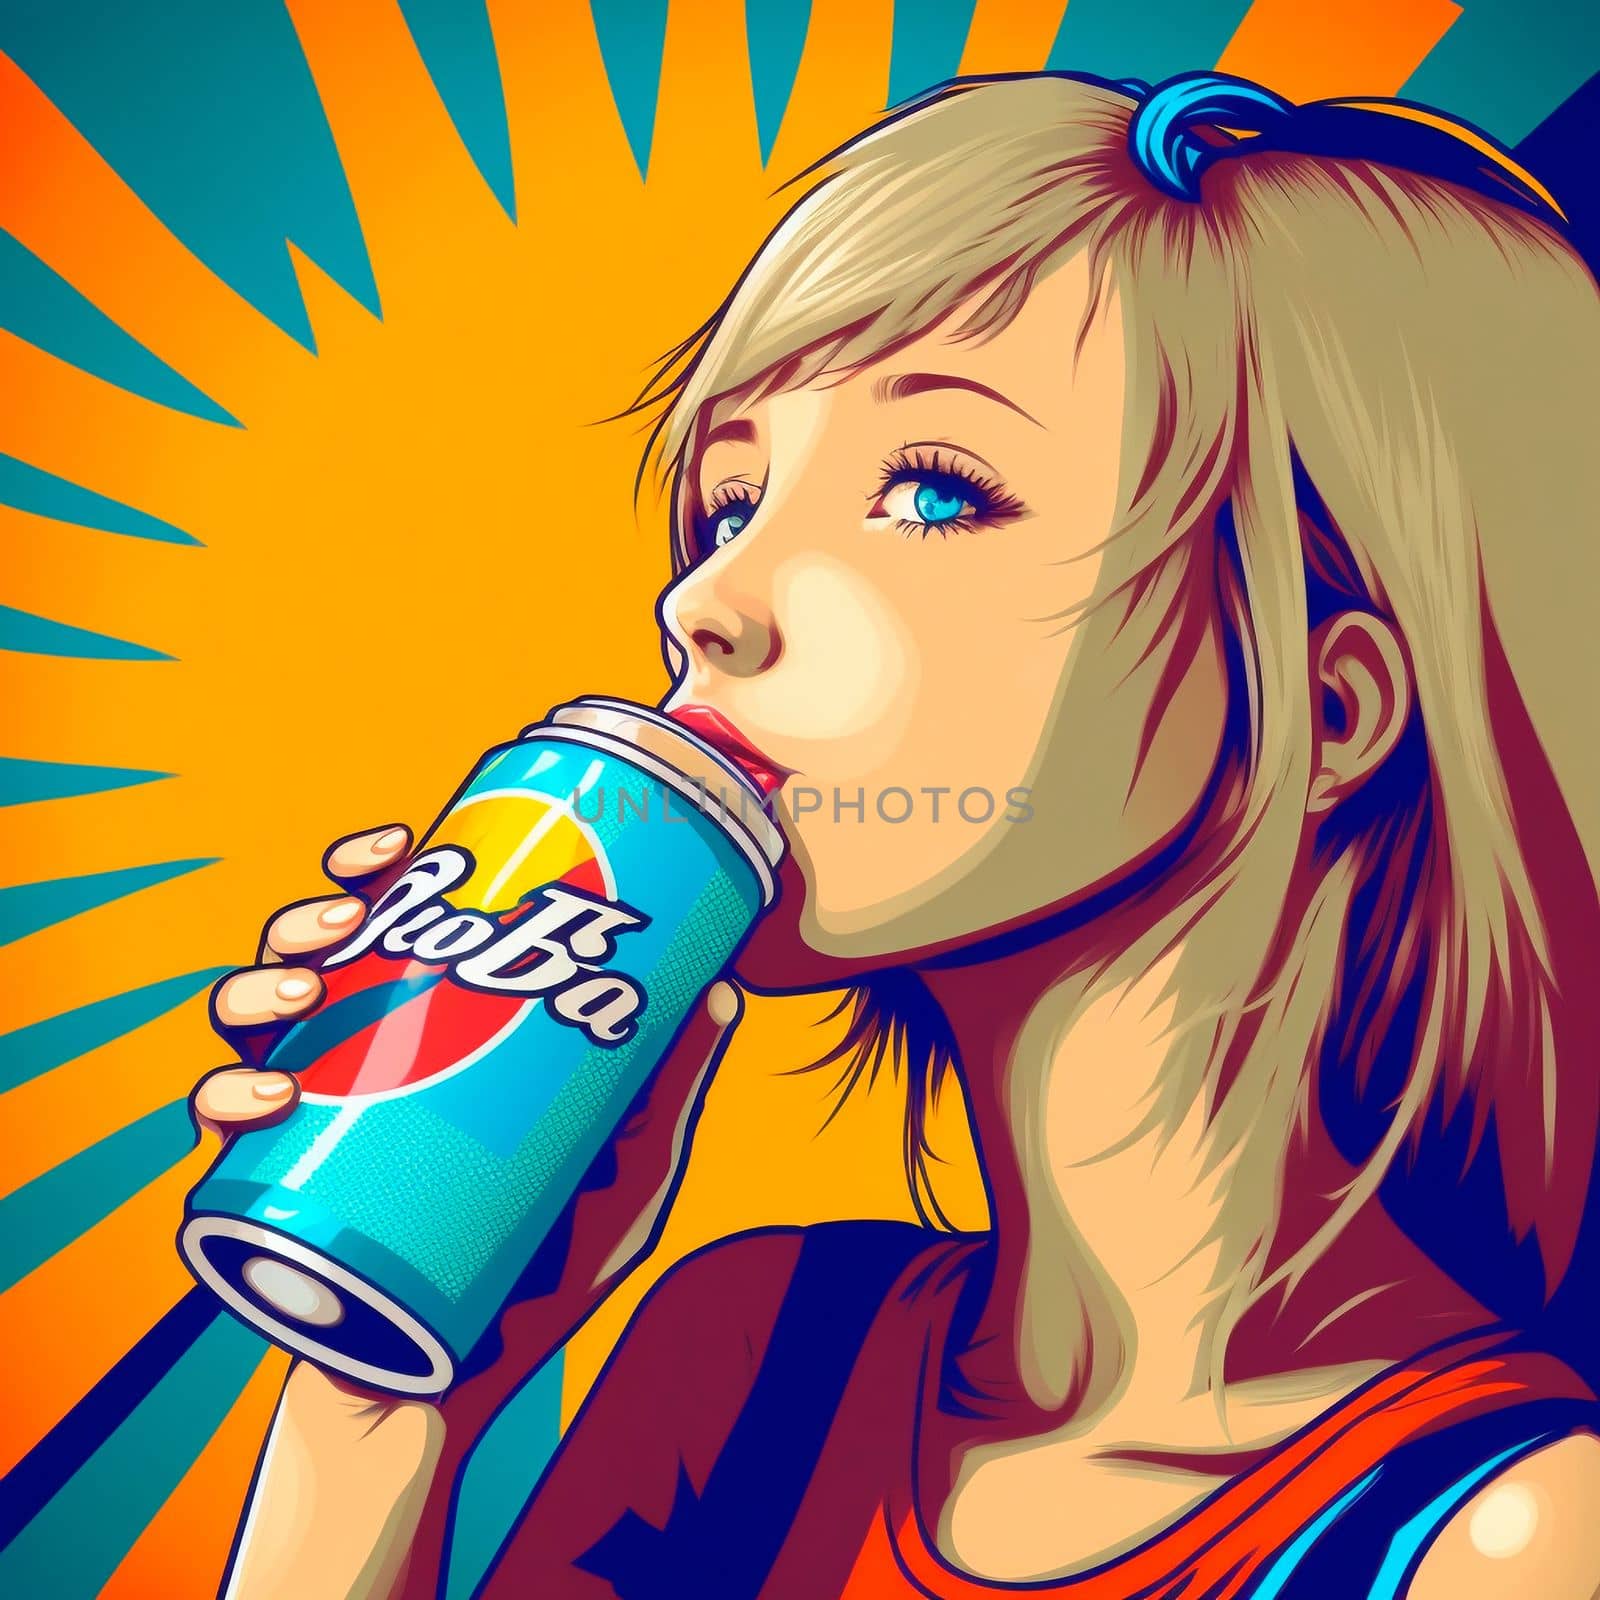 Girl drinks from a can in pop art style by NeuroSky